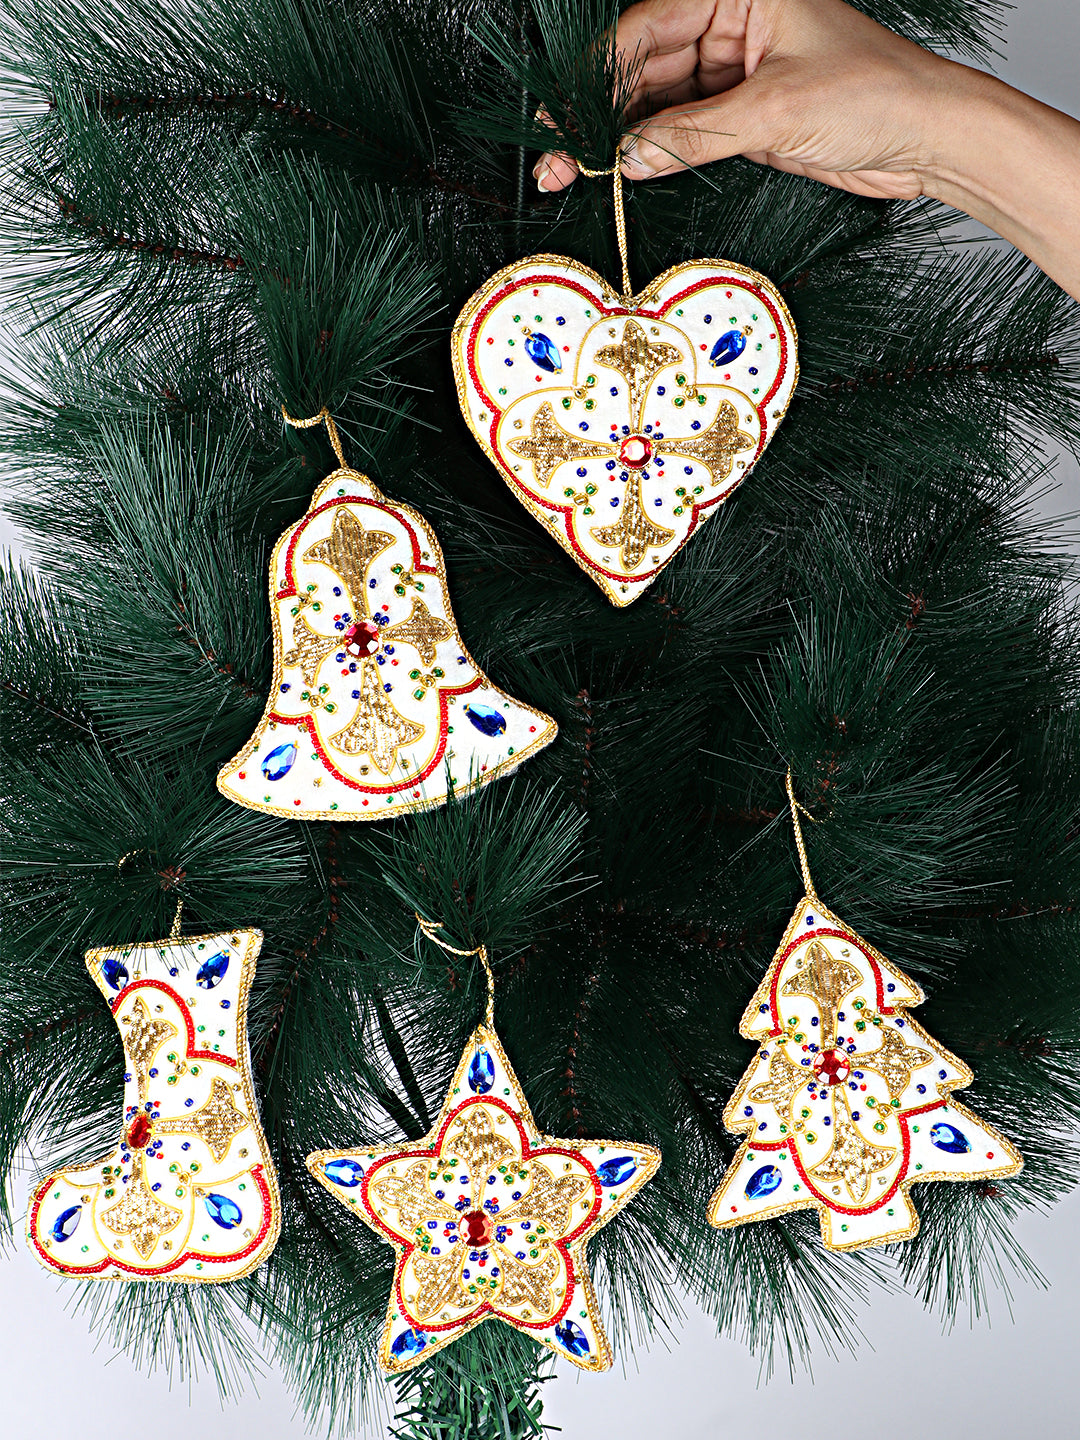 Snowy Sparkle - Stars, Hearts, Bell, Shoe & tree Christmas ornaments set of 5 pieces for holiday decor (1SET=5PC)